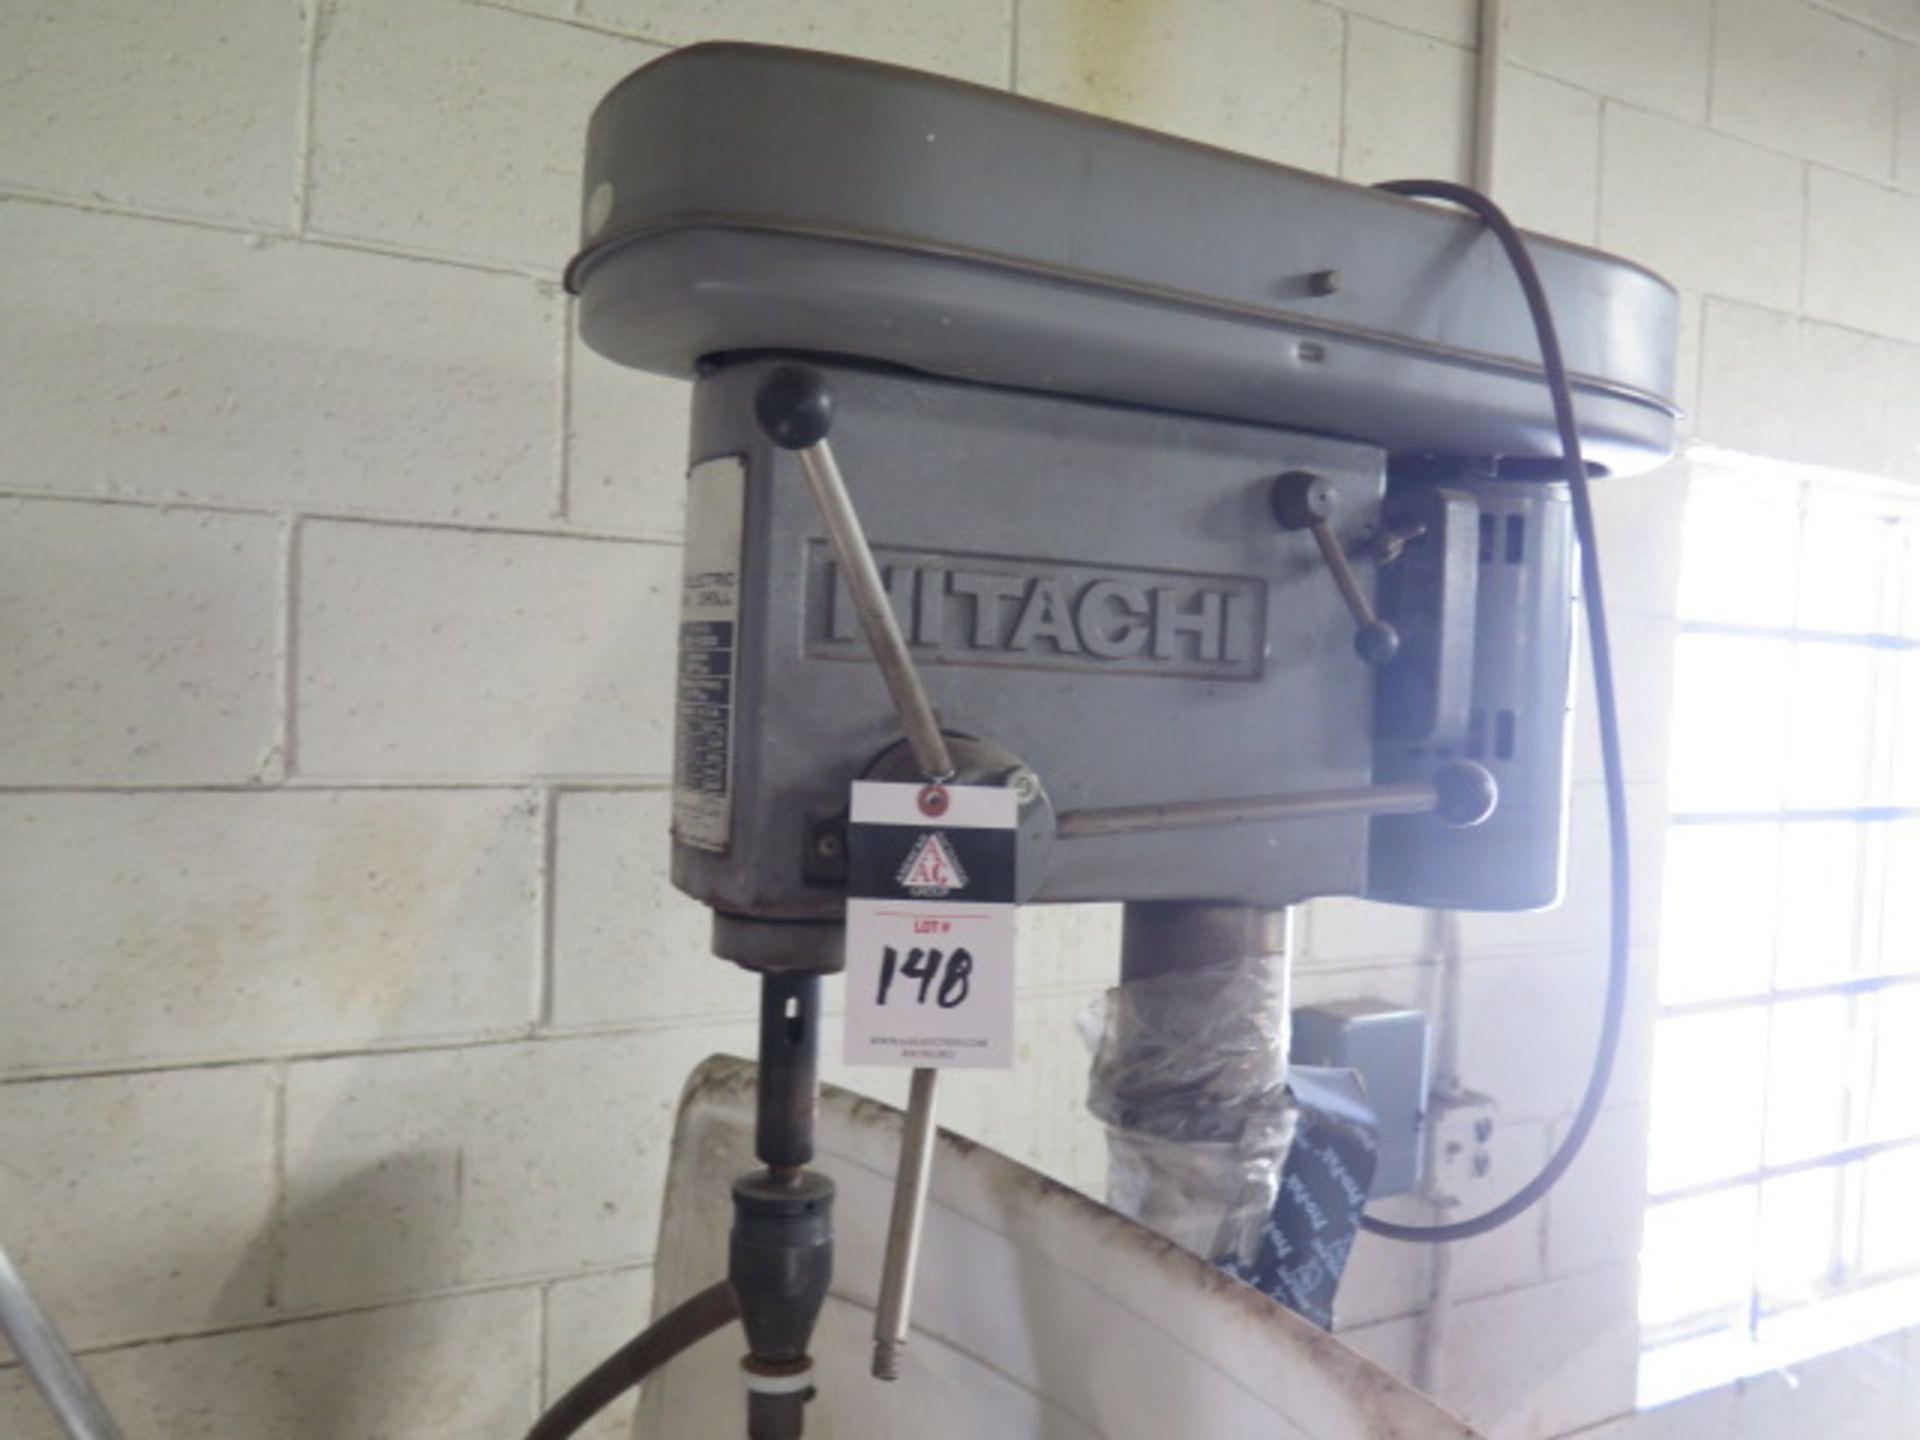 Hitachi Bench Model Drill Press w/ Custom Coolant Thru-Feed Attachment (SOLD AS-IS - NO WARRANTY) - Image 3 of 5